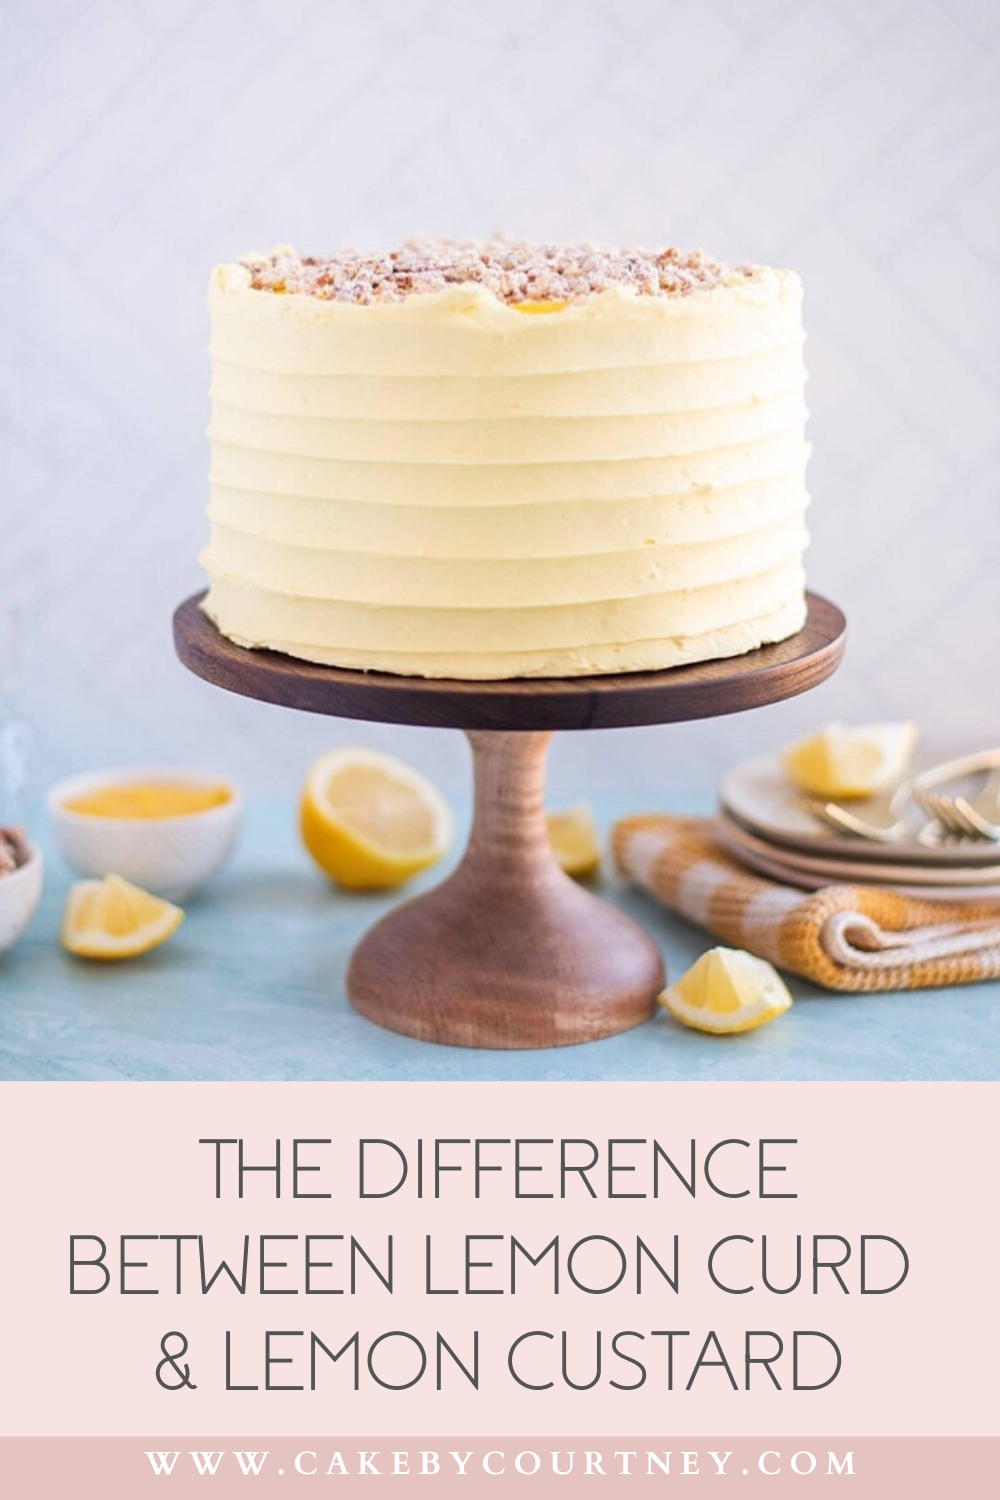 what's the difference between lemon curd and lemon custard. www.cakebycourtney.com